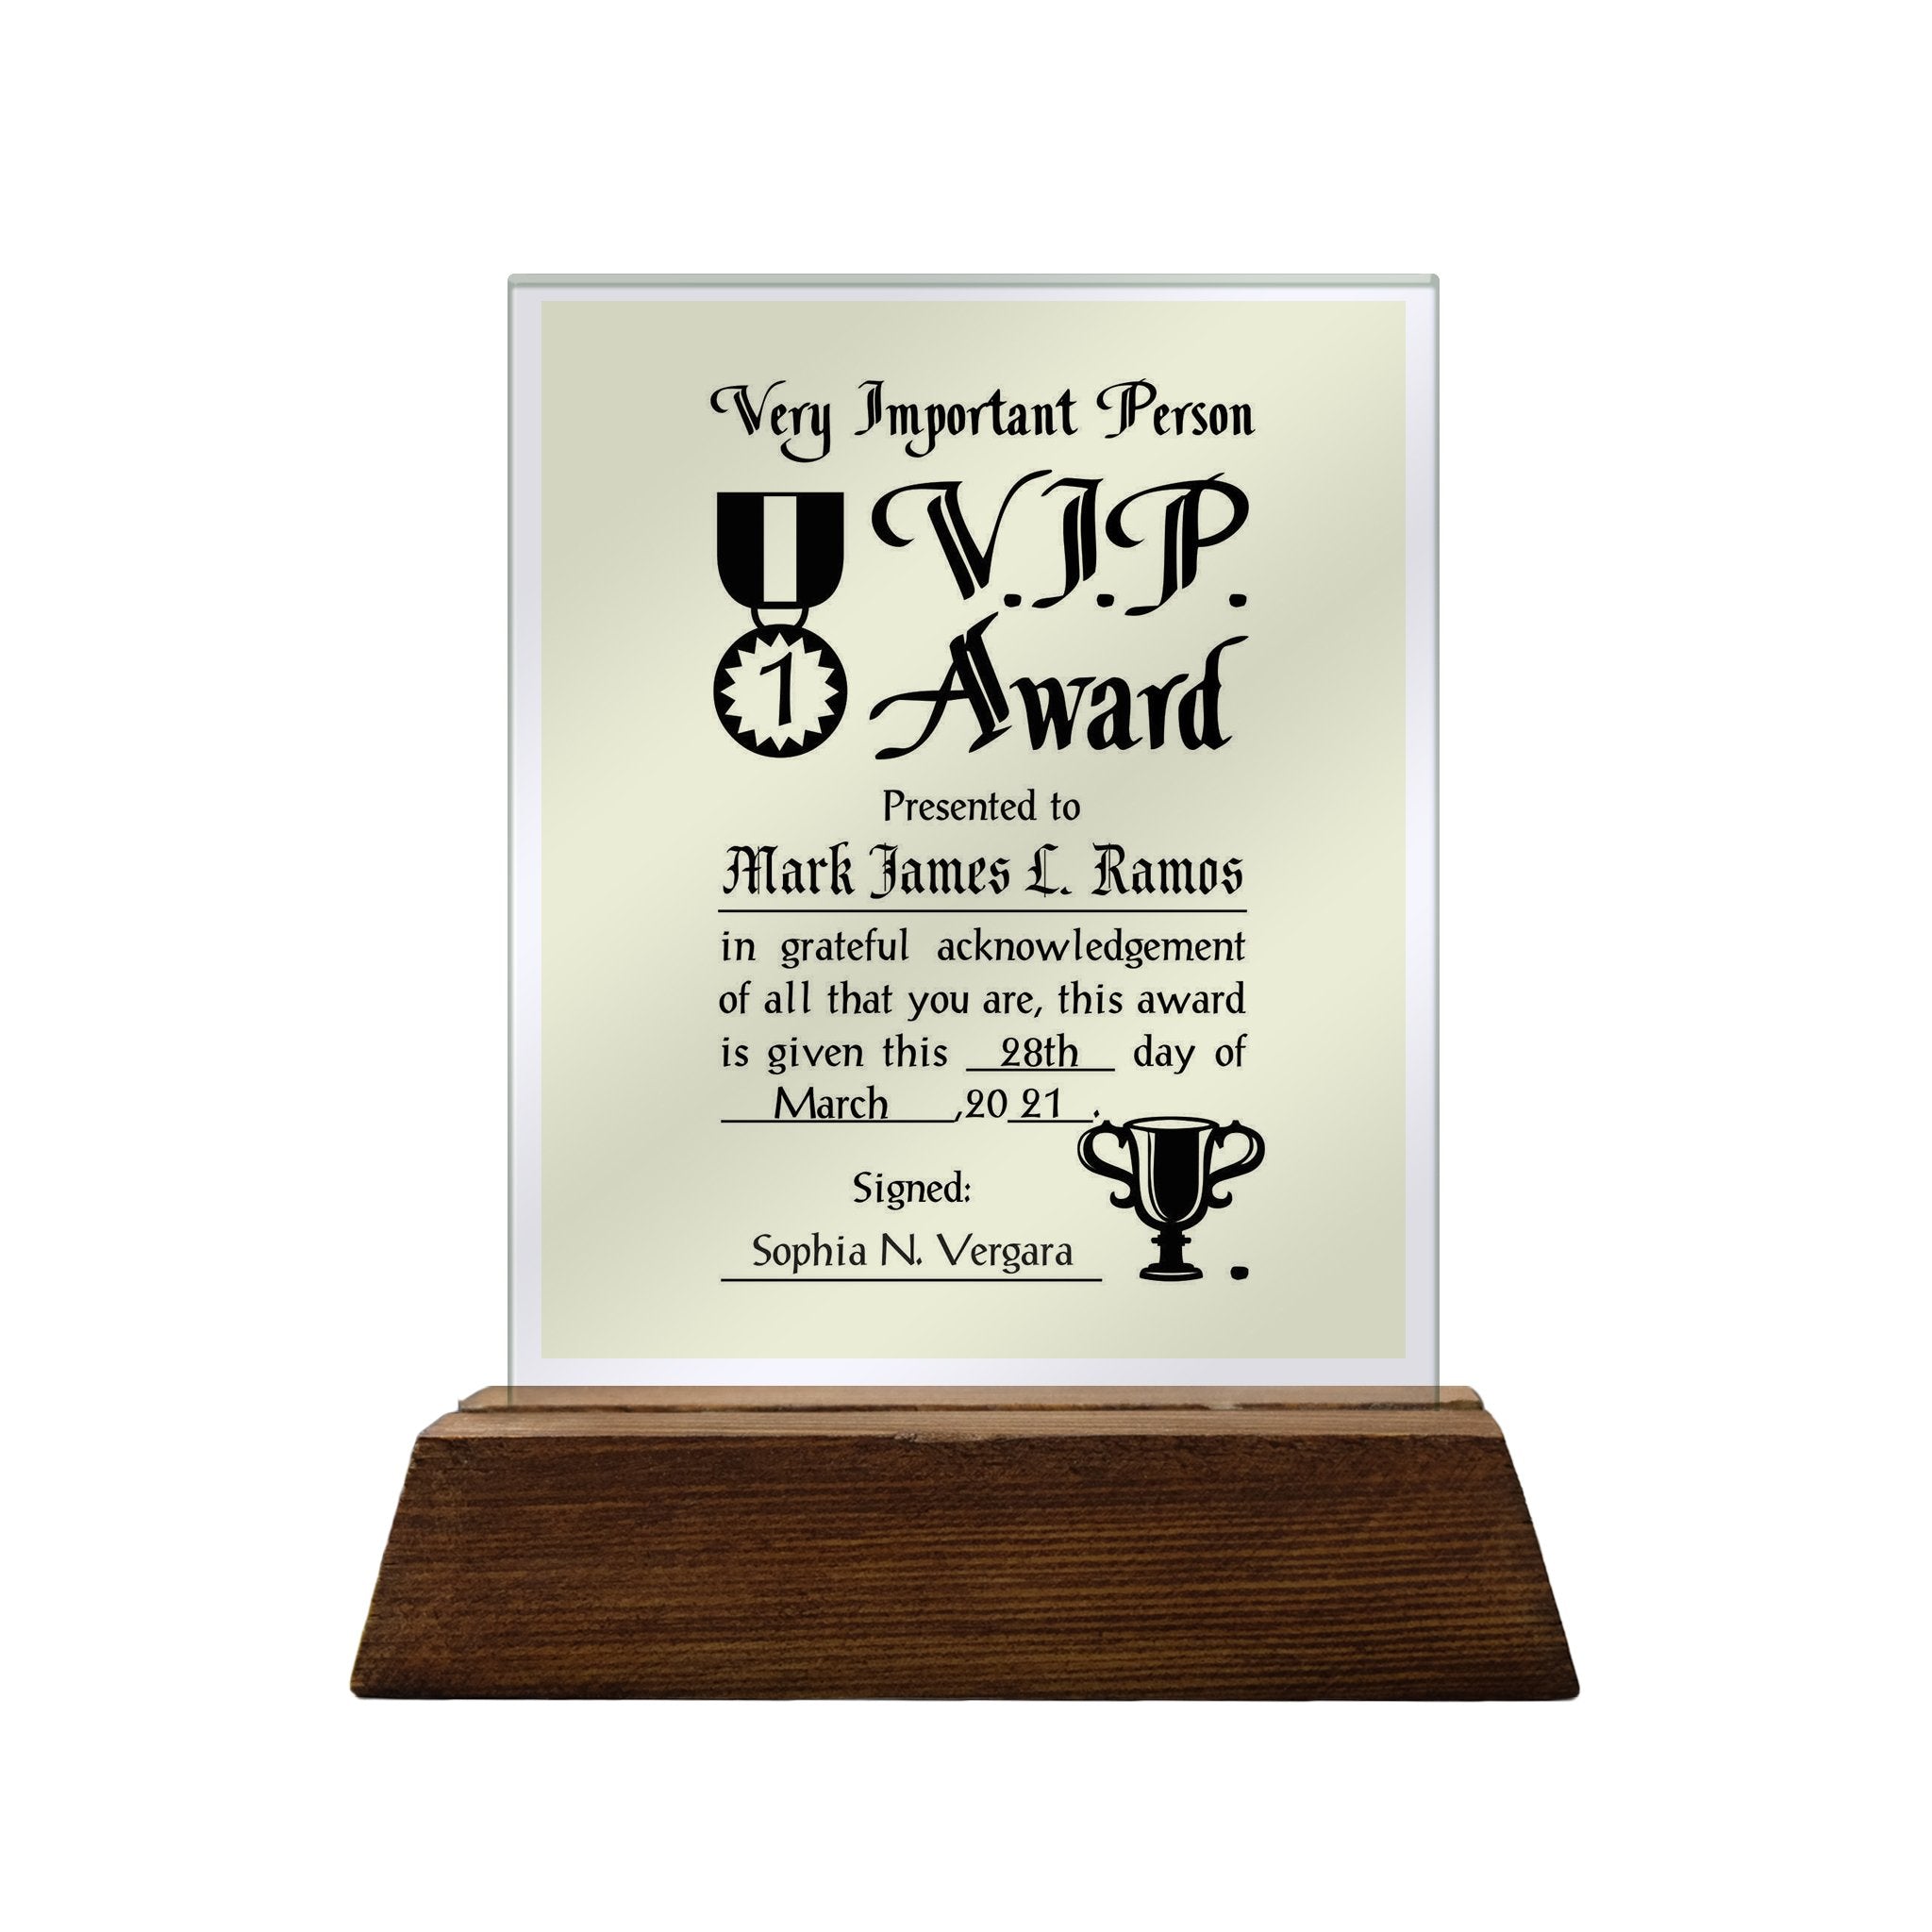 Very Important Person Award Personalized Glass Plaque